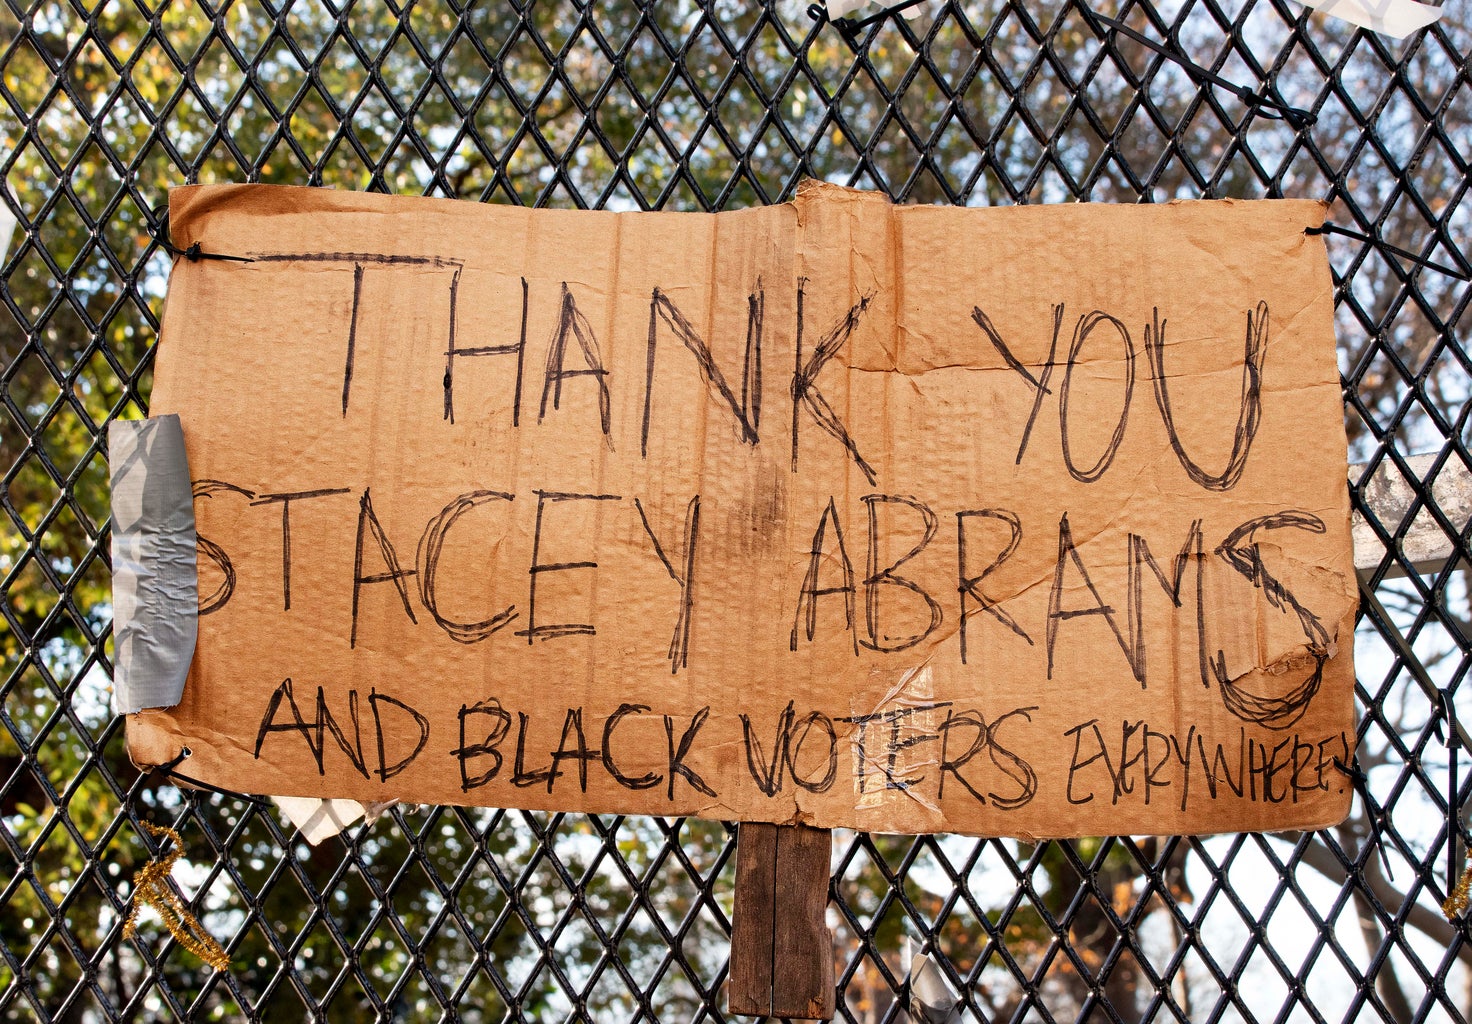 Thank you Stacey Abrams and Black voters sign